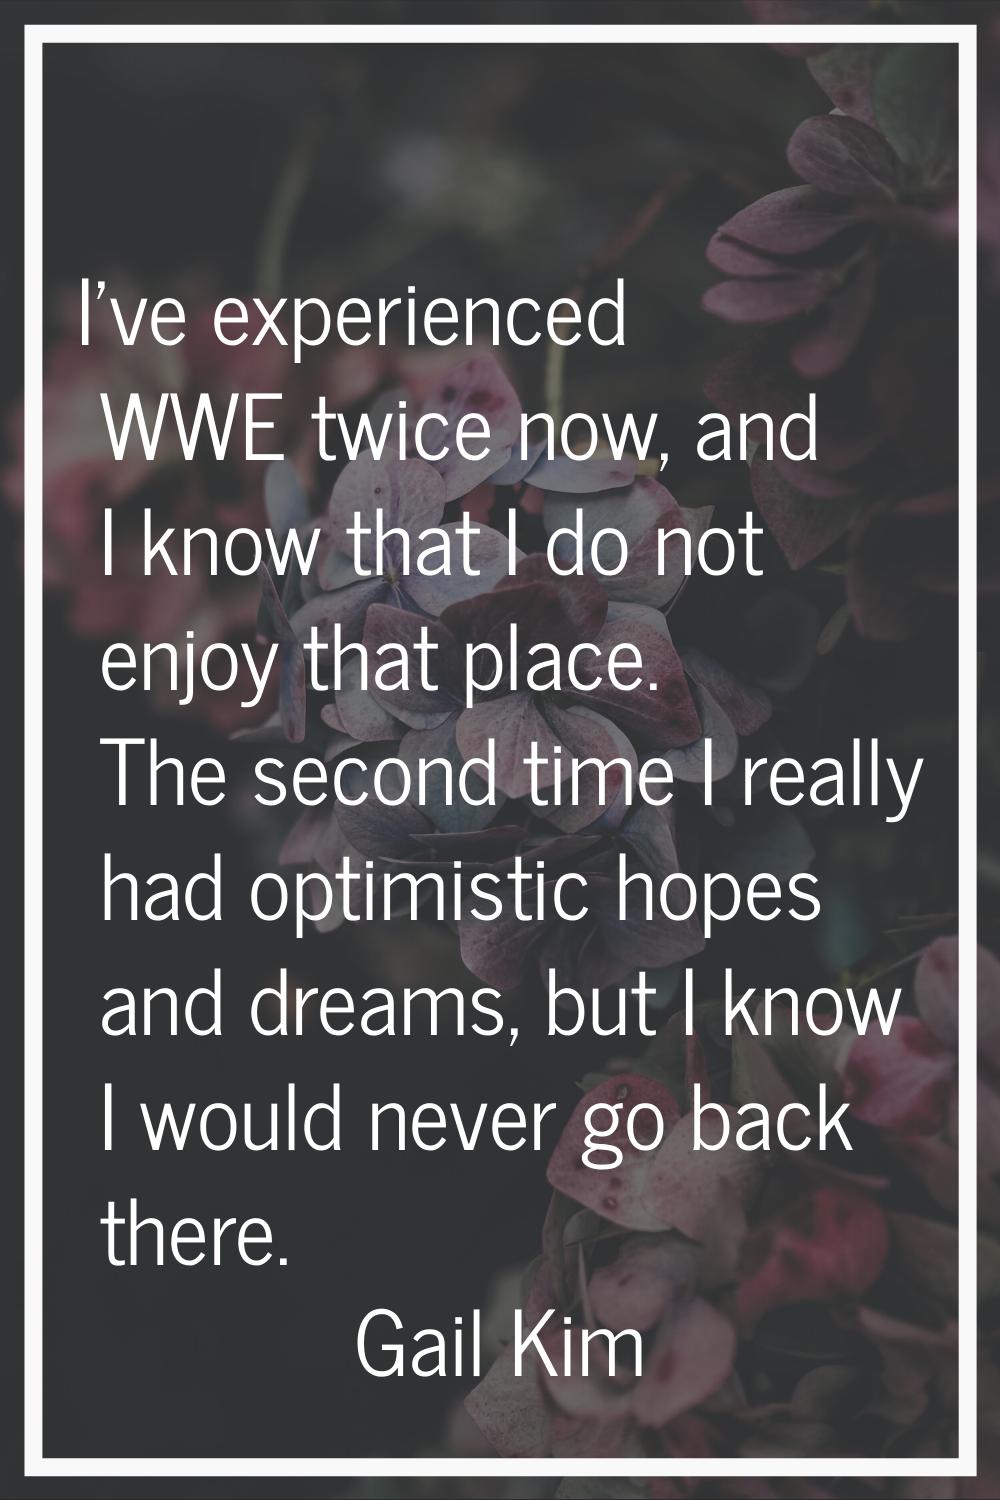 I've experienced WWE twice now, and I know that I do not enjoy that place. The second time I really